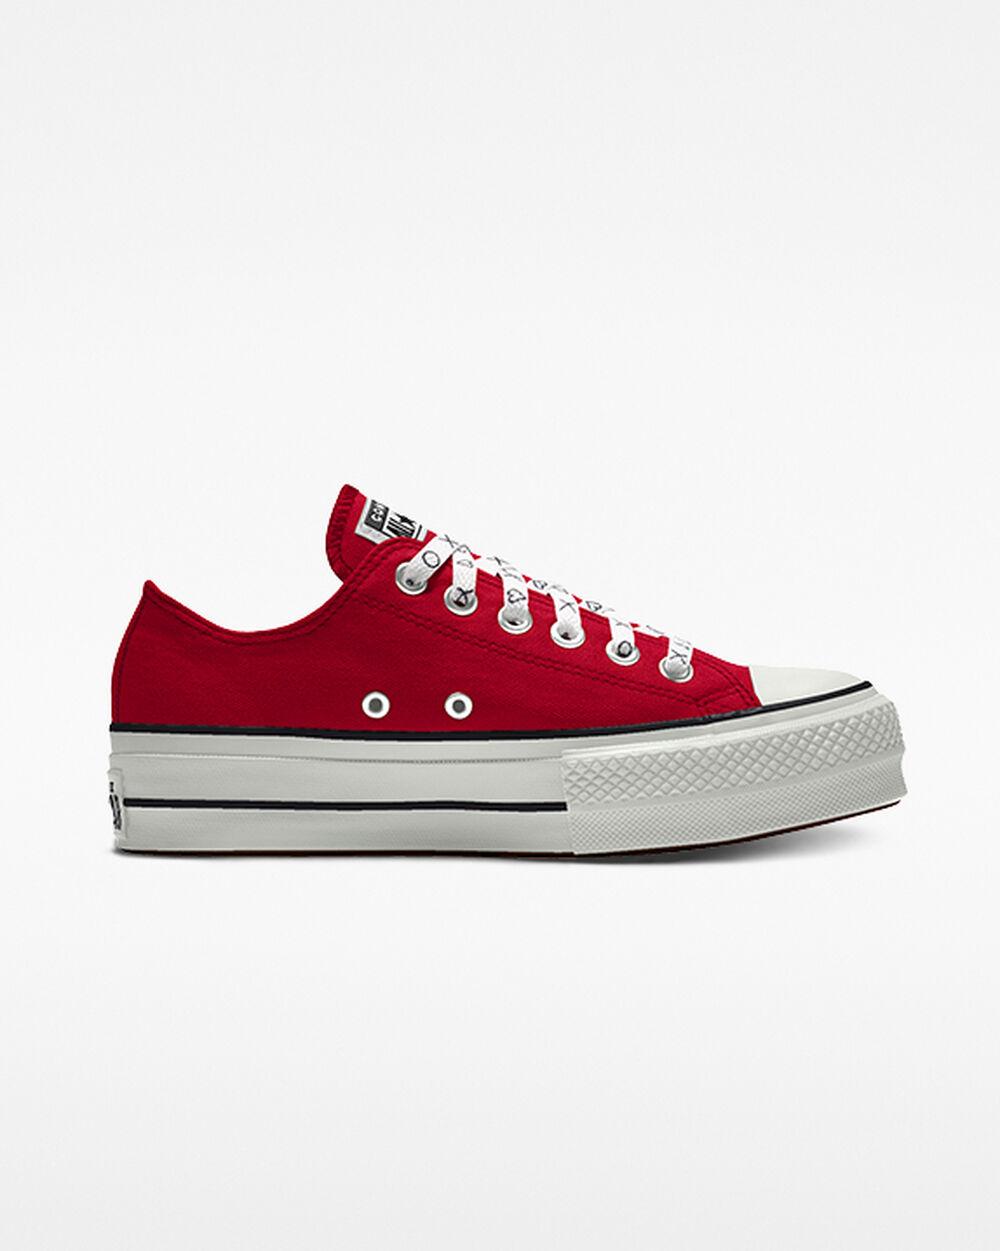 Converse Custom Chuck Taylor All Star Lift Platform Canvas By You in ...